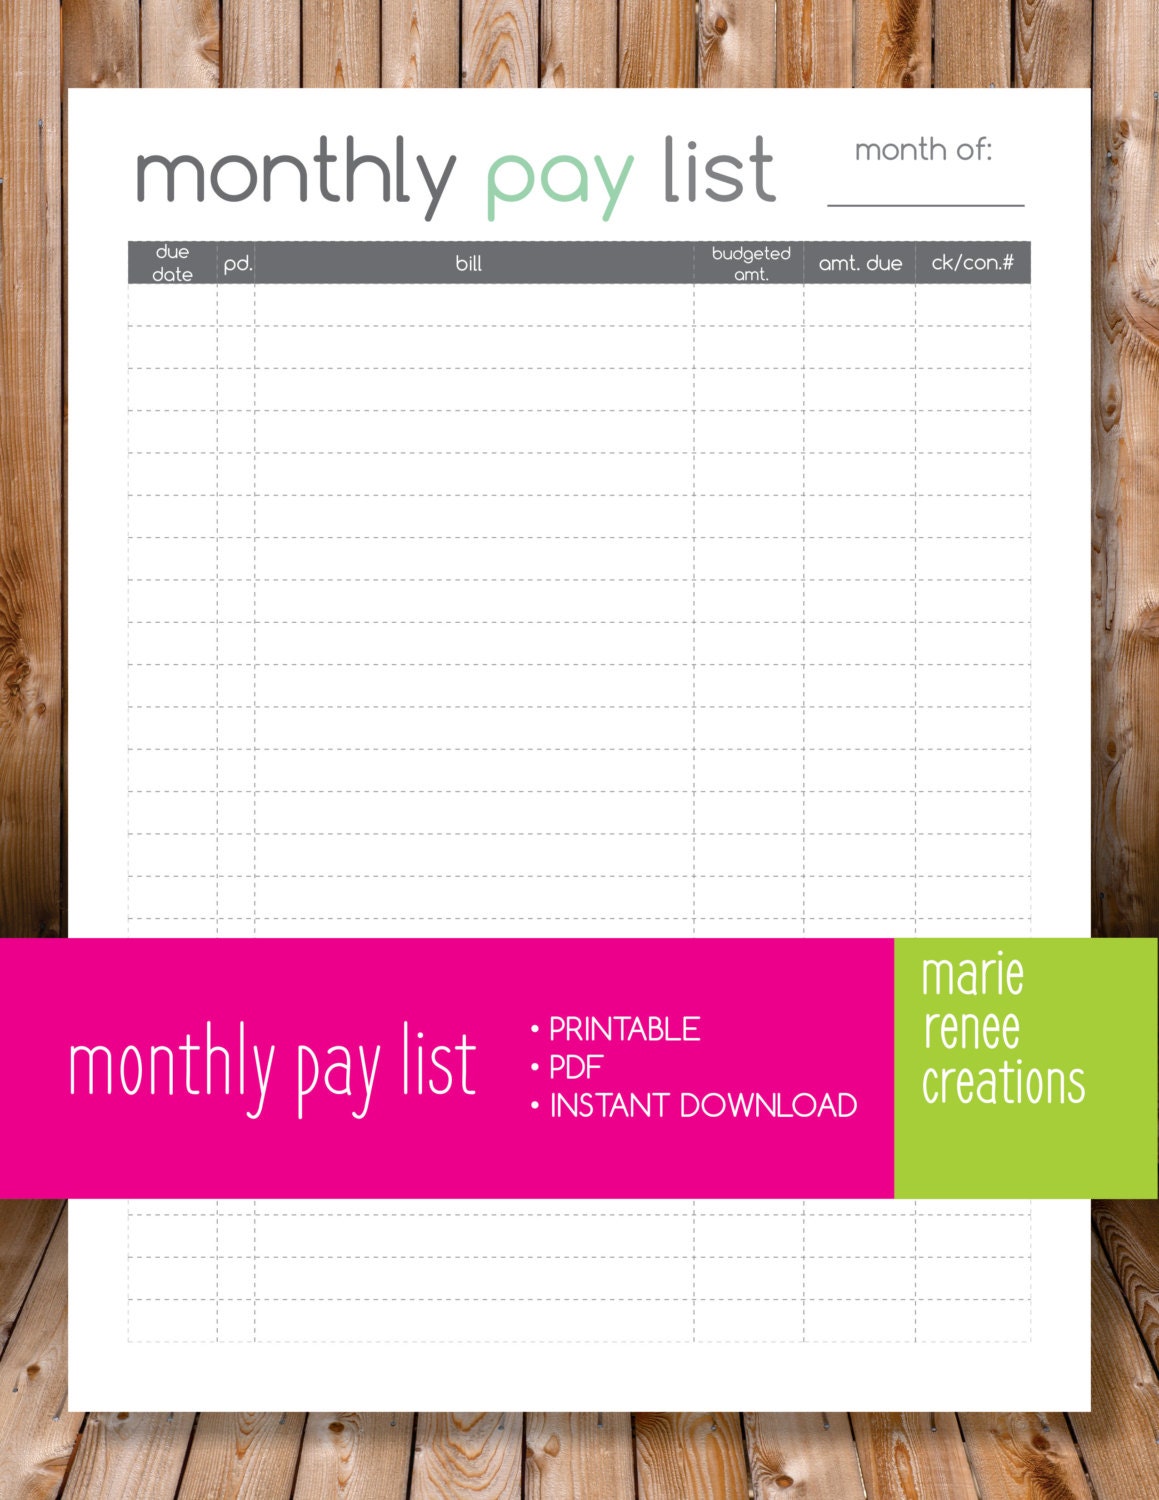 NEW Monthly Pay List Blank Printable